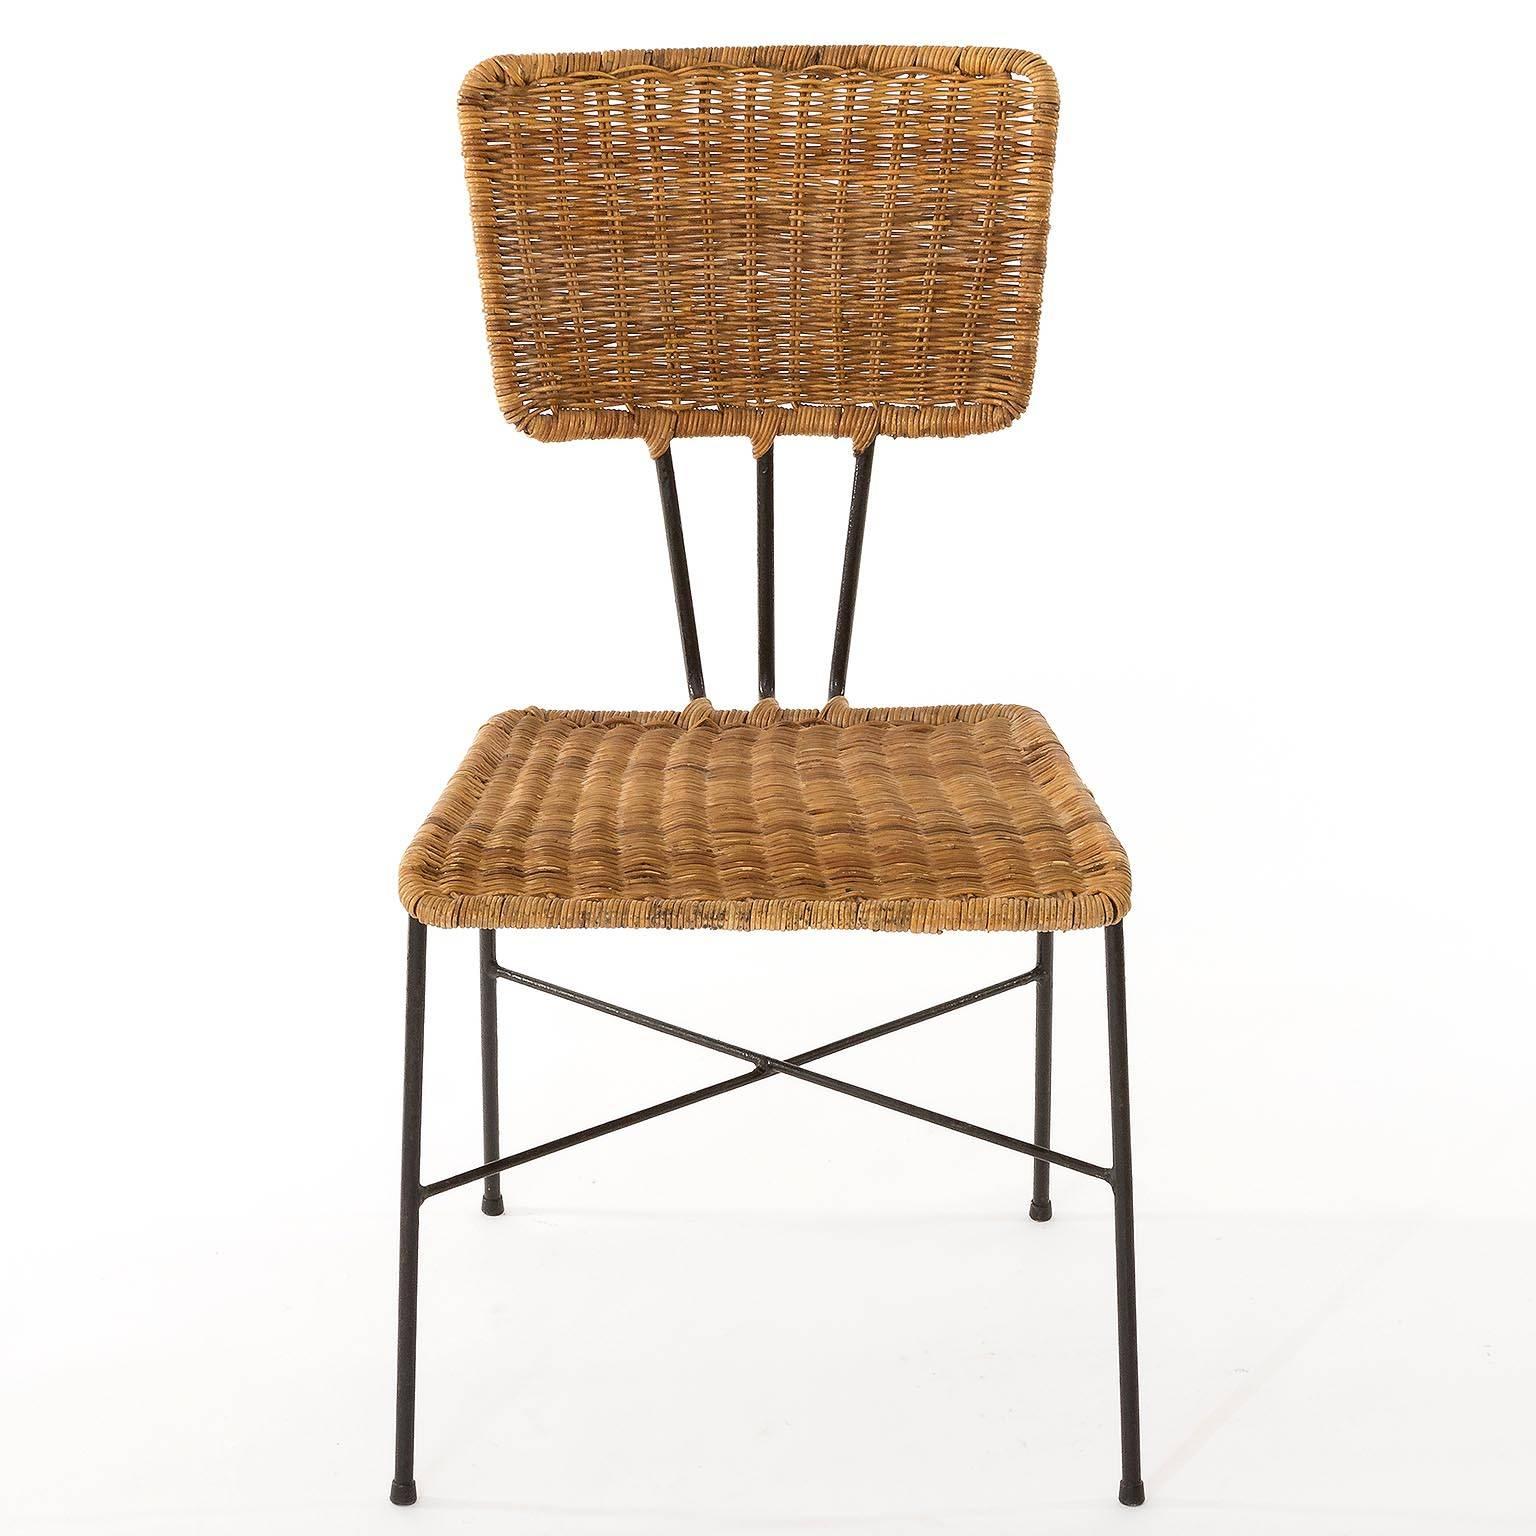 A set of six wicker and blackened iron chairs, manufactured in Mid-Century in 1950s. Original and good vintage condition with little wear.

The price is per chair. They will be sold singly, as pair or as set of three, four, five or six chairs.